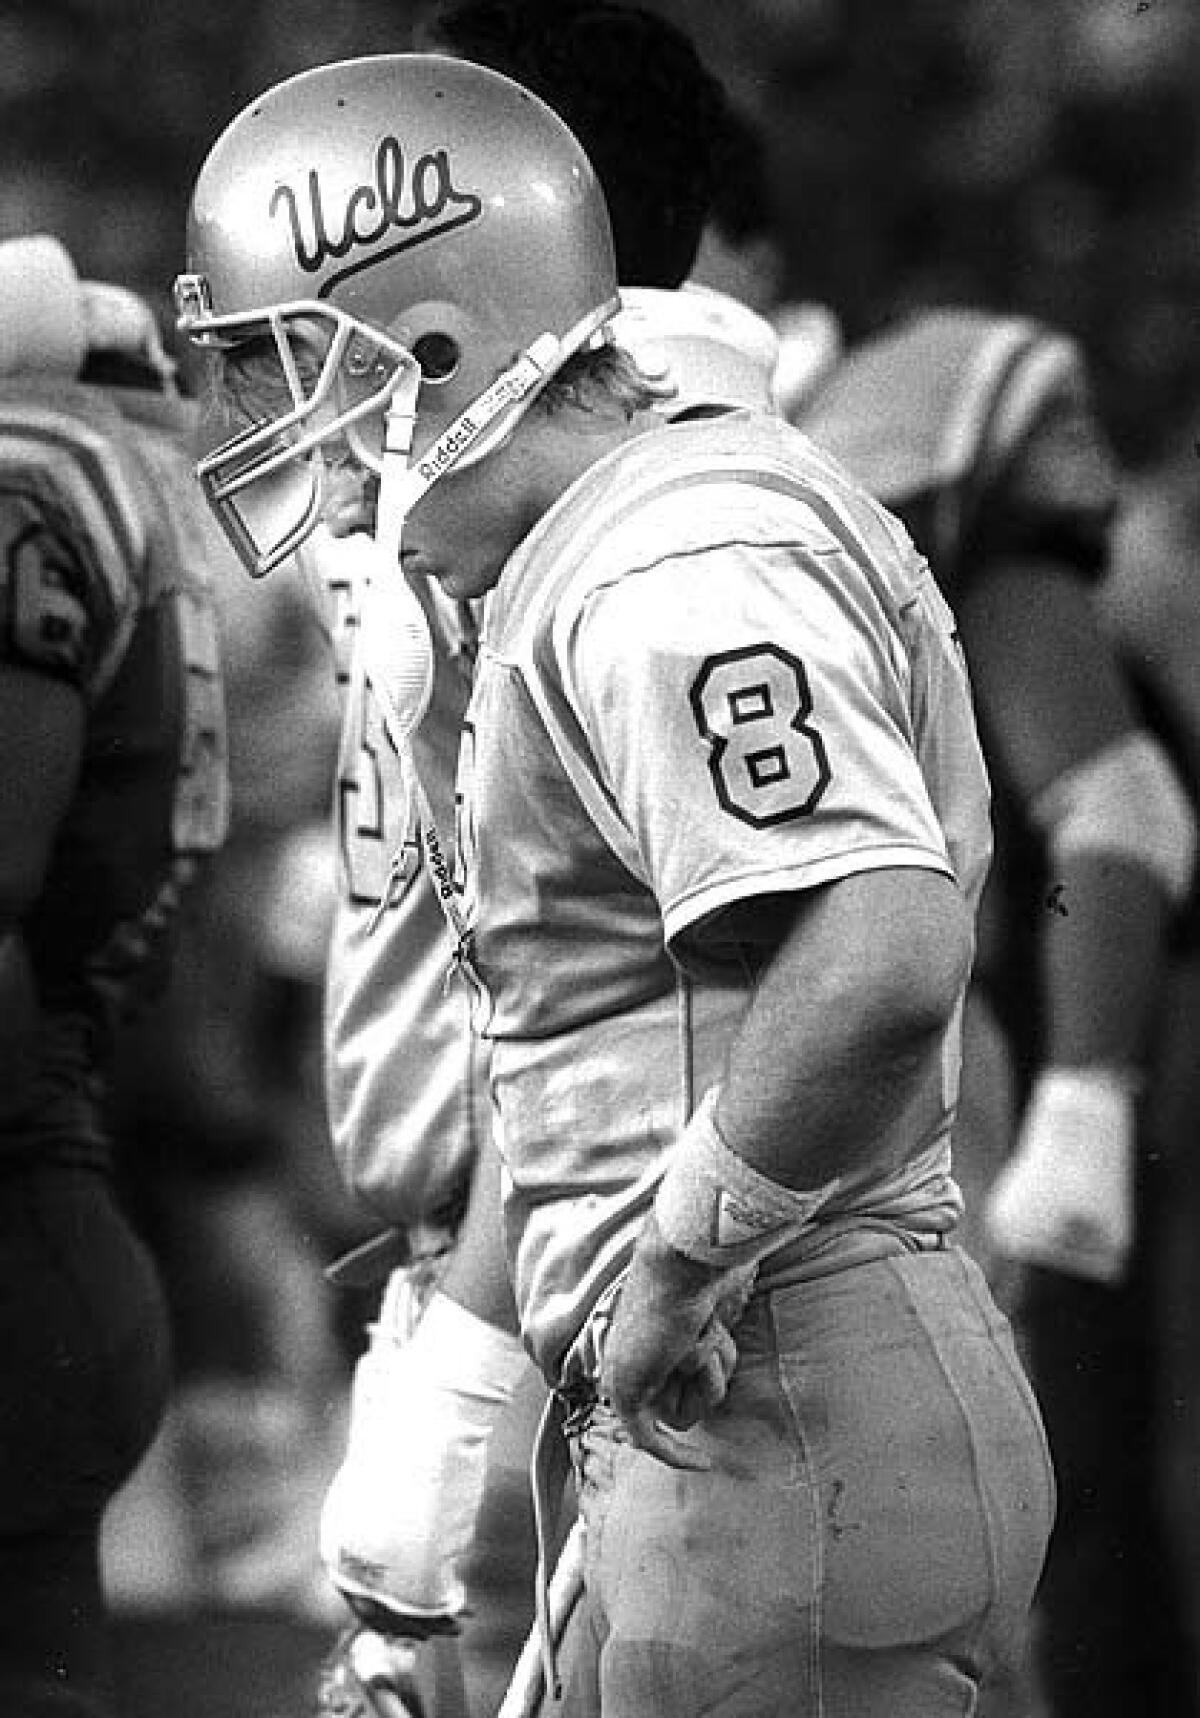 UCLA quarterback Troy Aikman walks off the field after the 31-22 loss to USC.